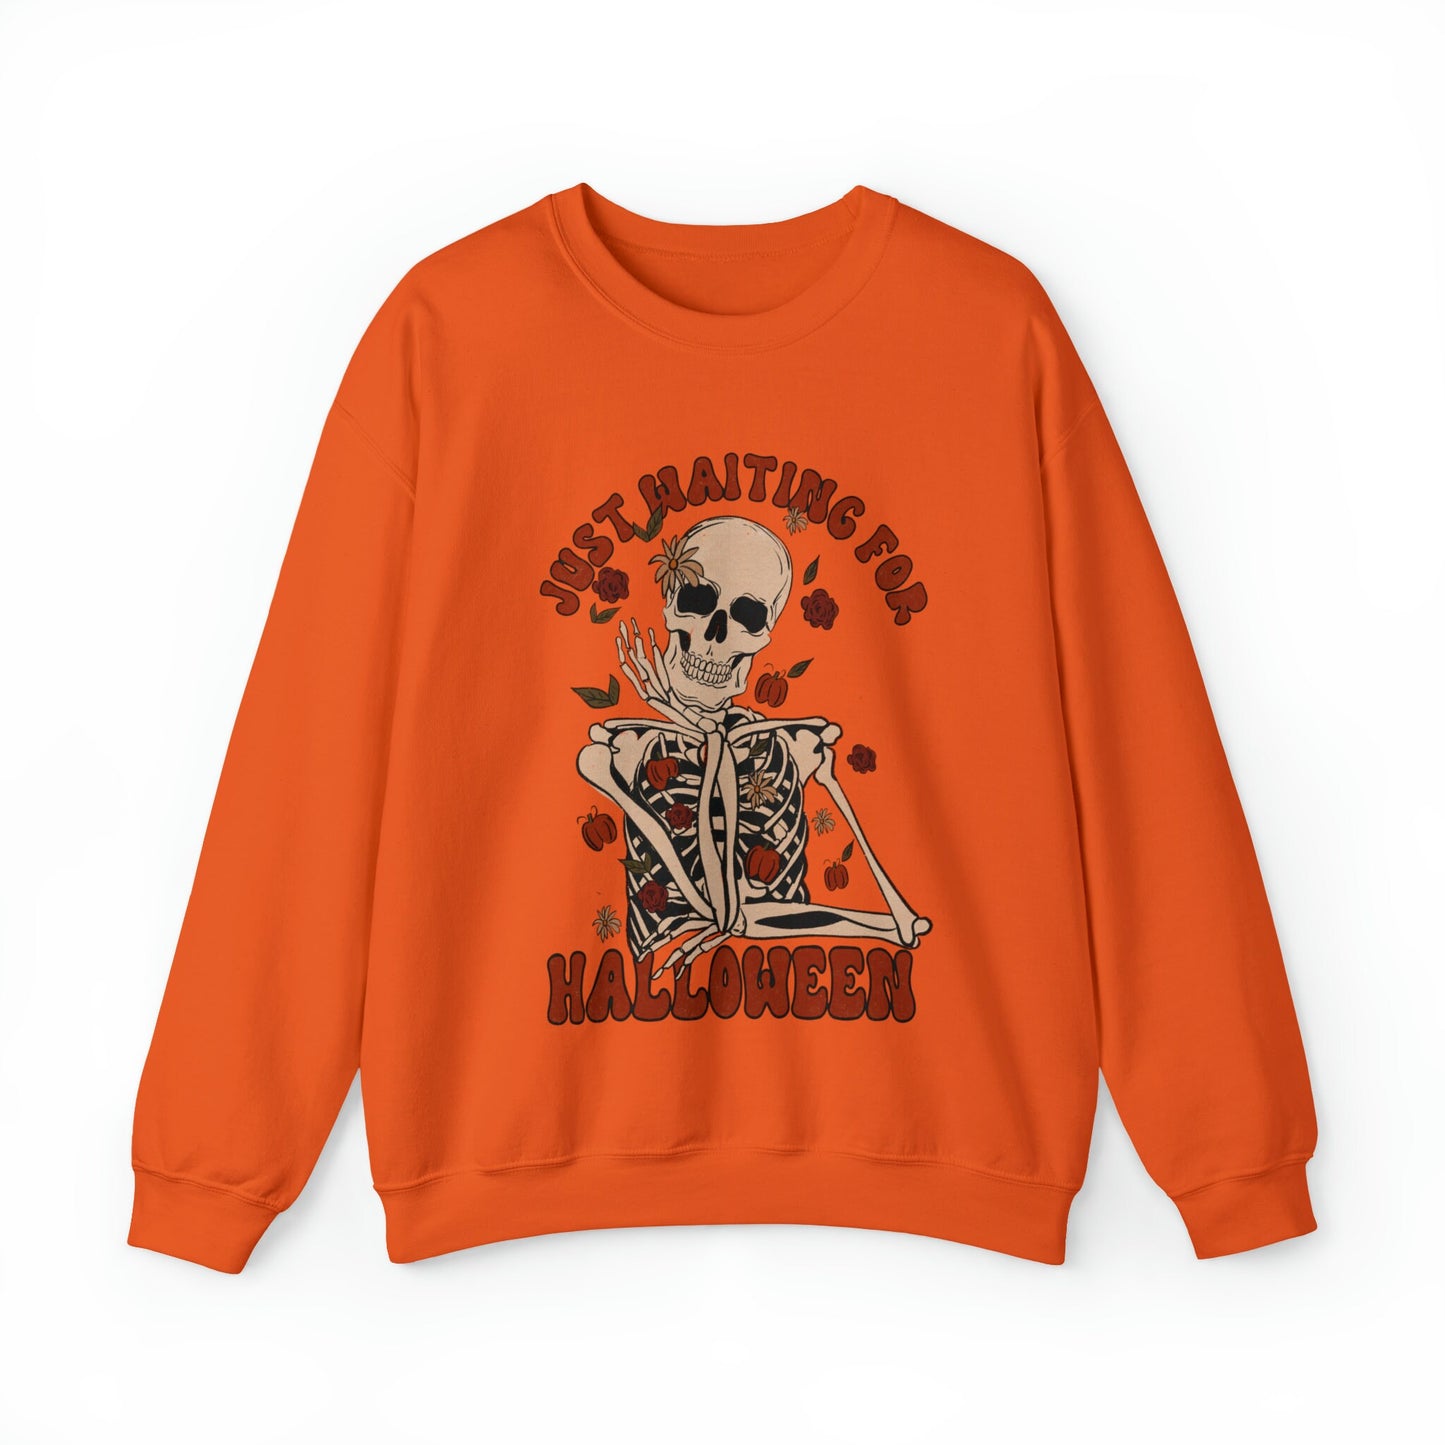 Embrace the Halloween Spirit with our Stay Spooky Sweatshirt - Perfect Halloween Gift for Ghost-Lovers